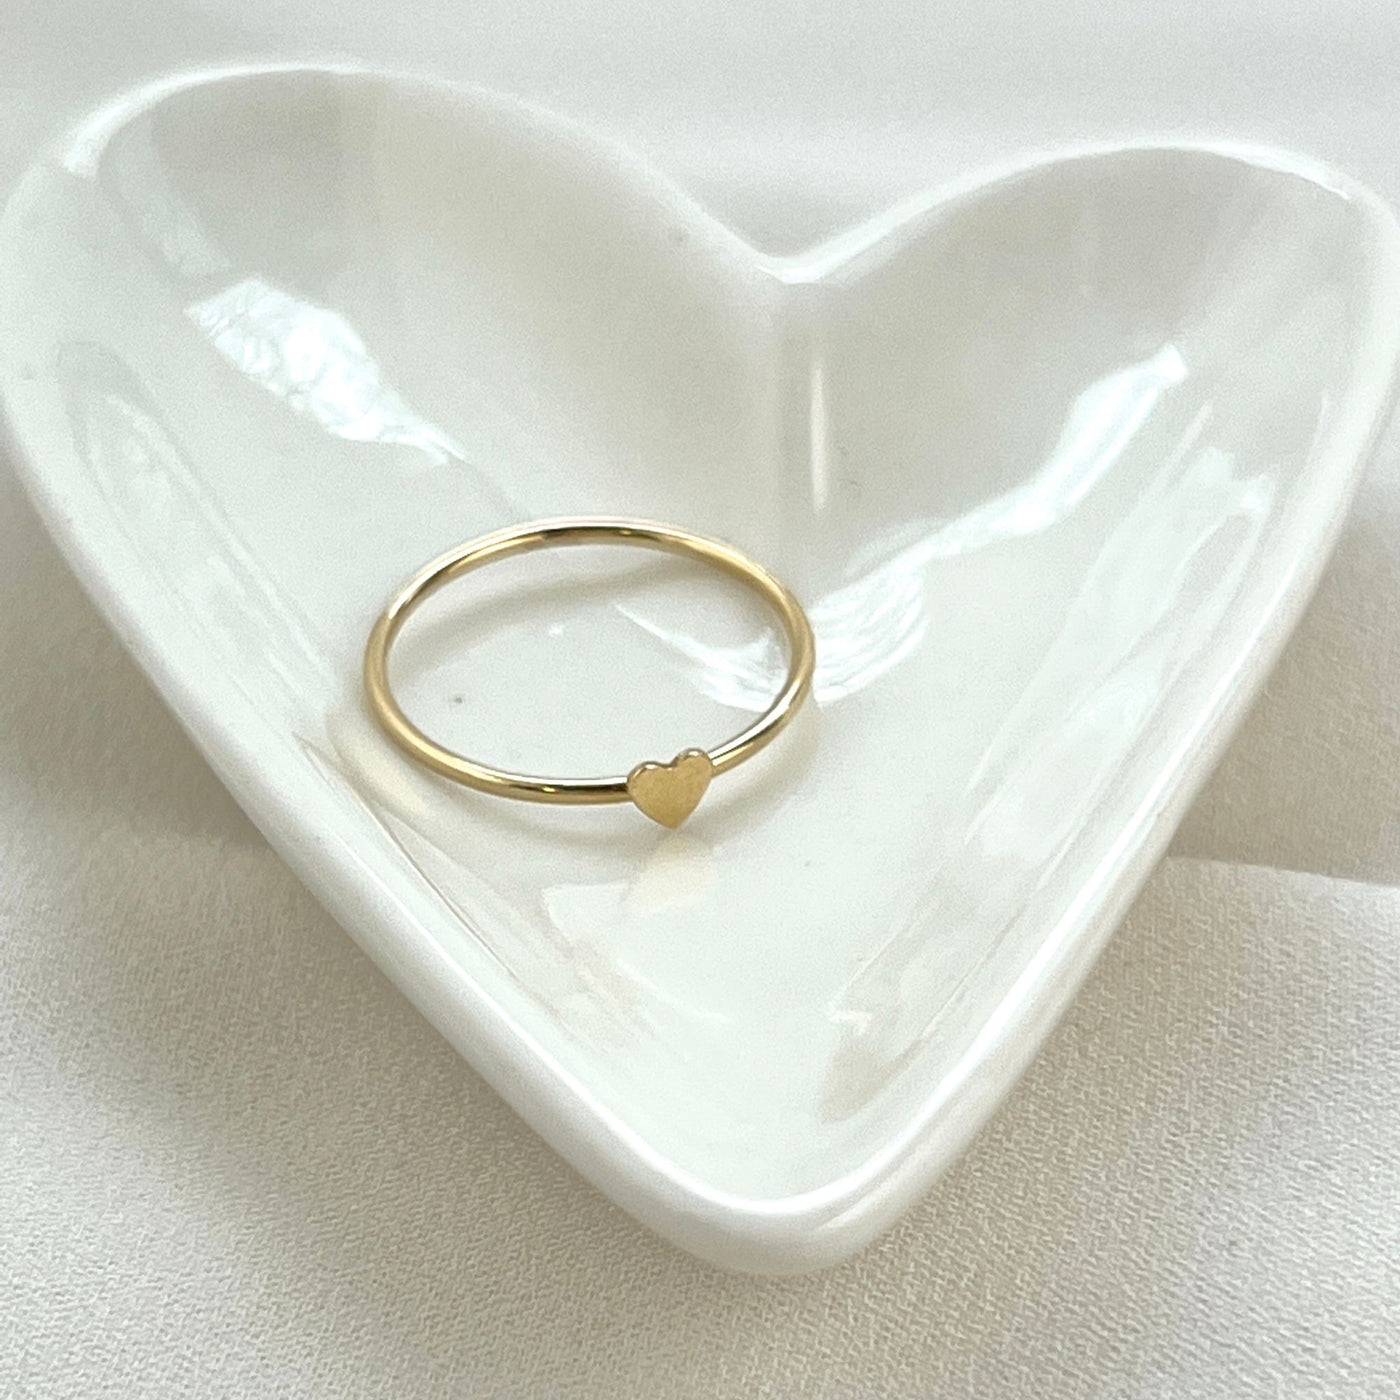 14K Gold filled simple band ring with tiny 2mm cut out heart shape on top. Gold heart ring is in a white shiny heart shaped jewelry dish